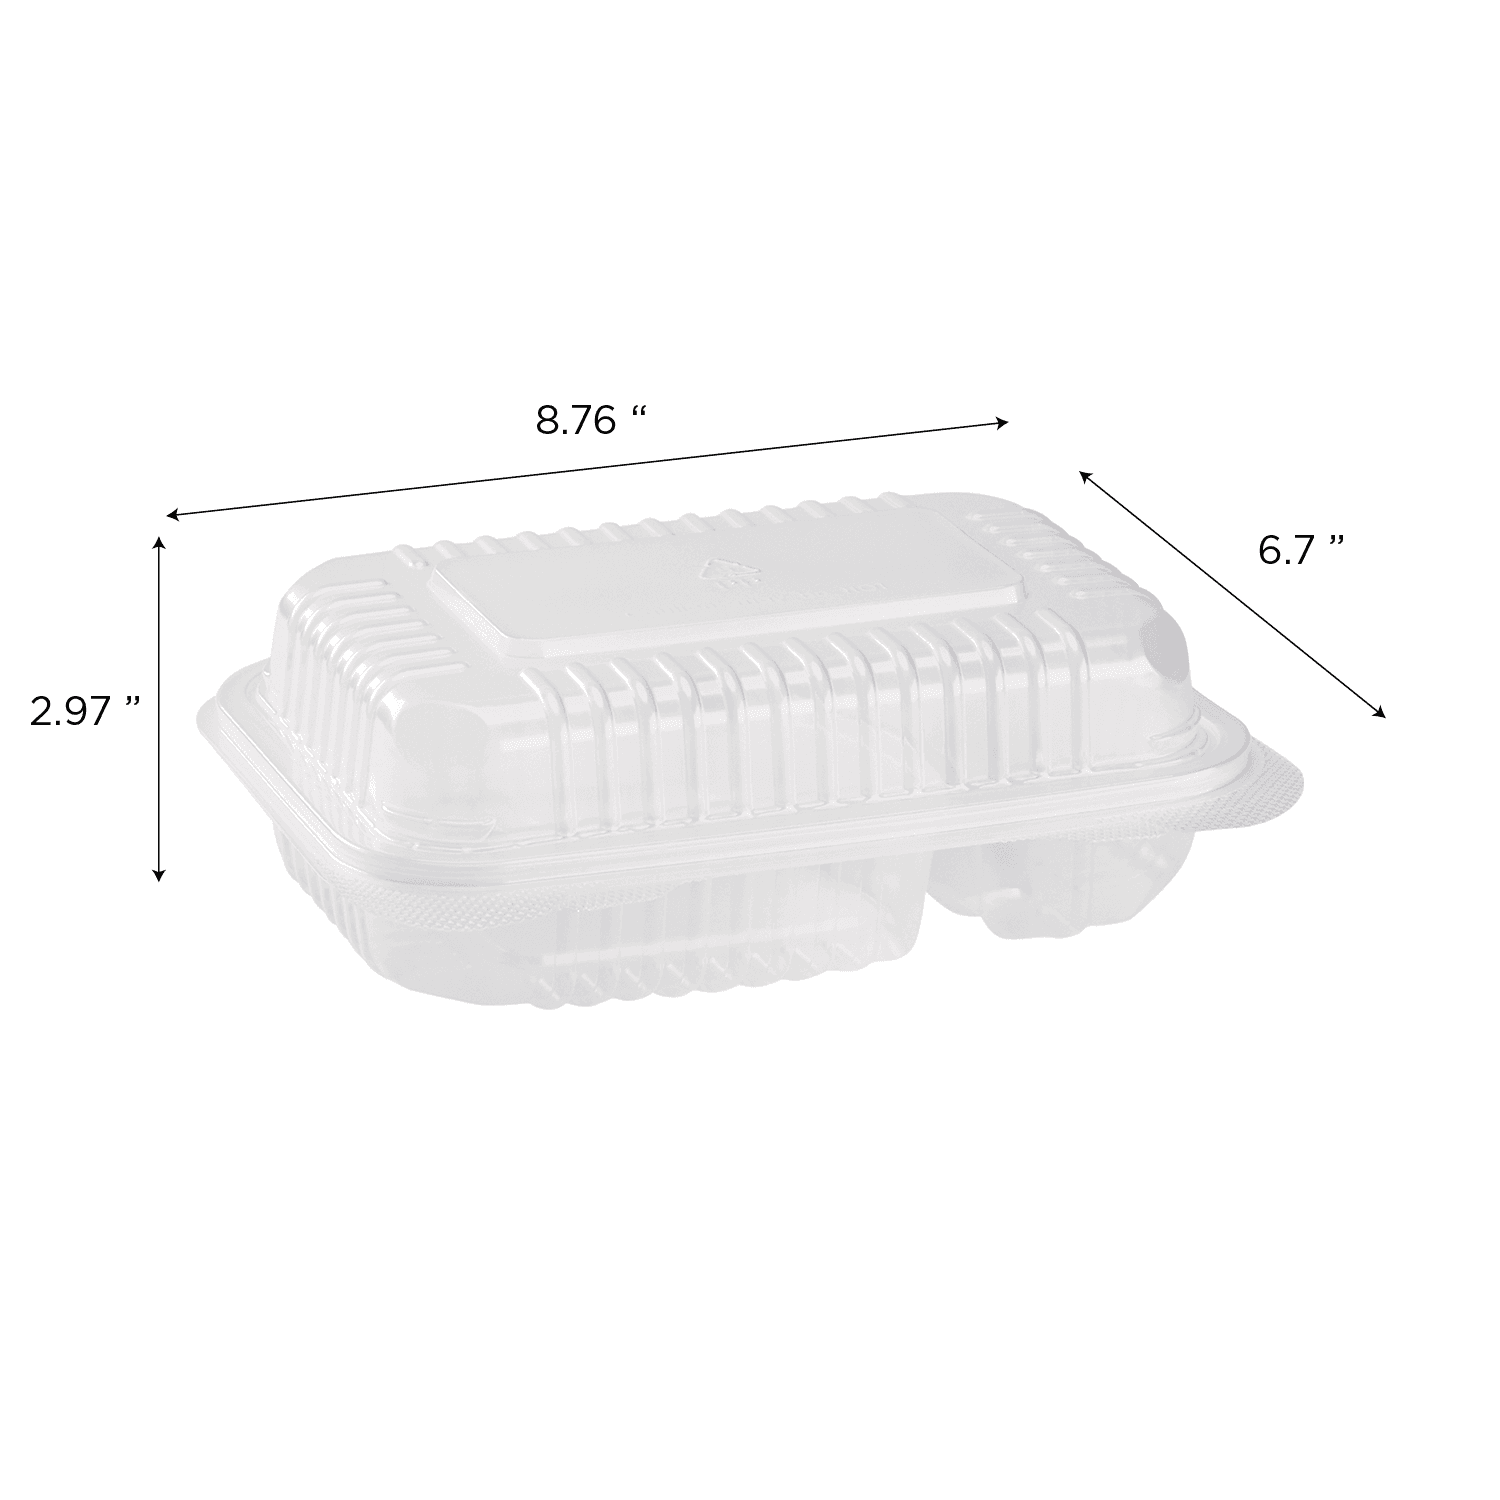 Karat 9'' x 6" PP Plastic Hinged Containers with 2 Compartments with dimensions